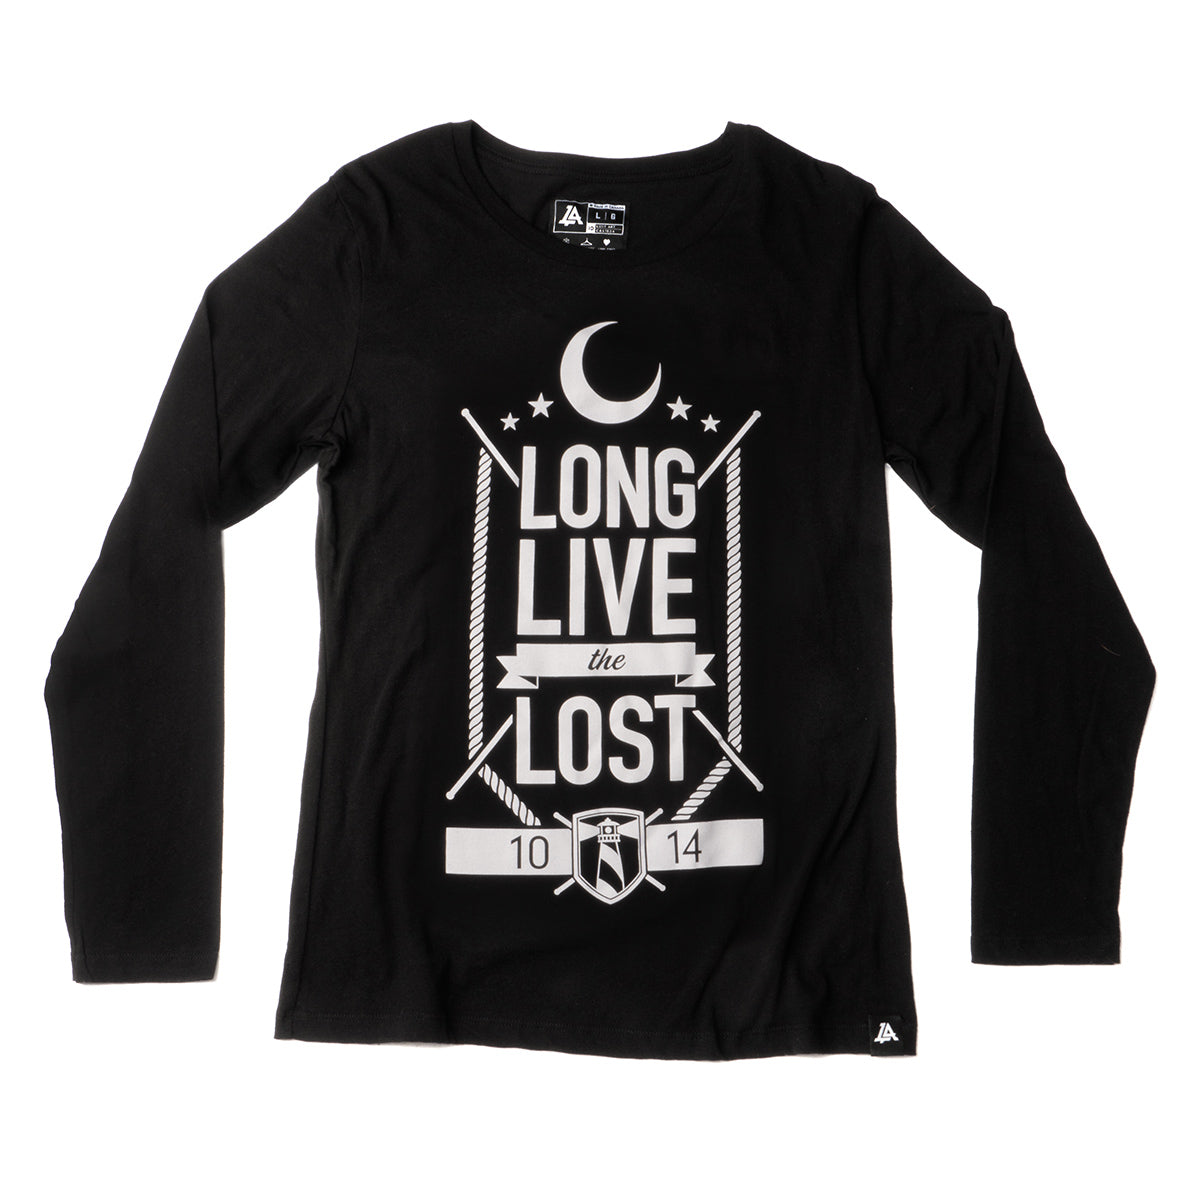 Lost Art Canada - black and white long live the lost longsleeve tee front view